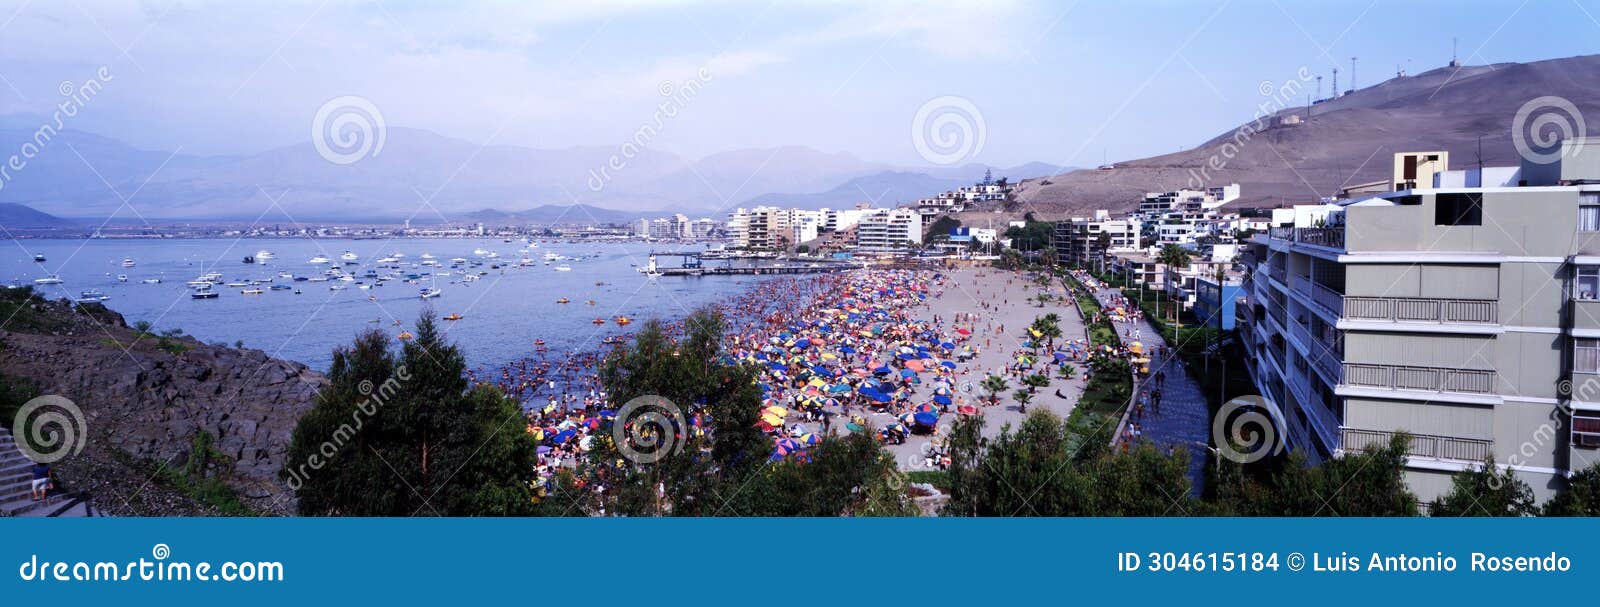 bay of ancon, lima peru panoramic viux town with beach with boat luxury building